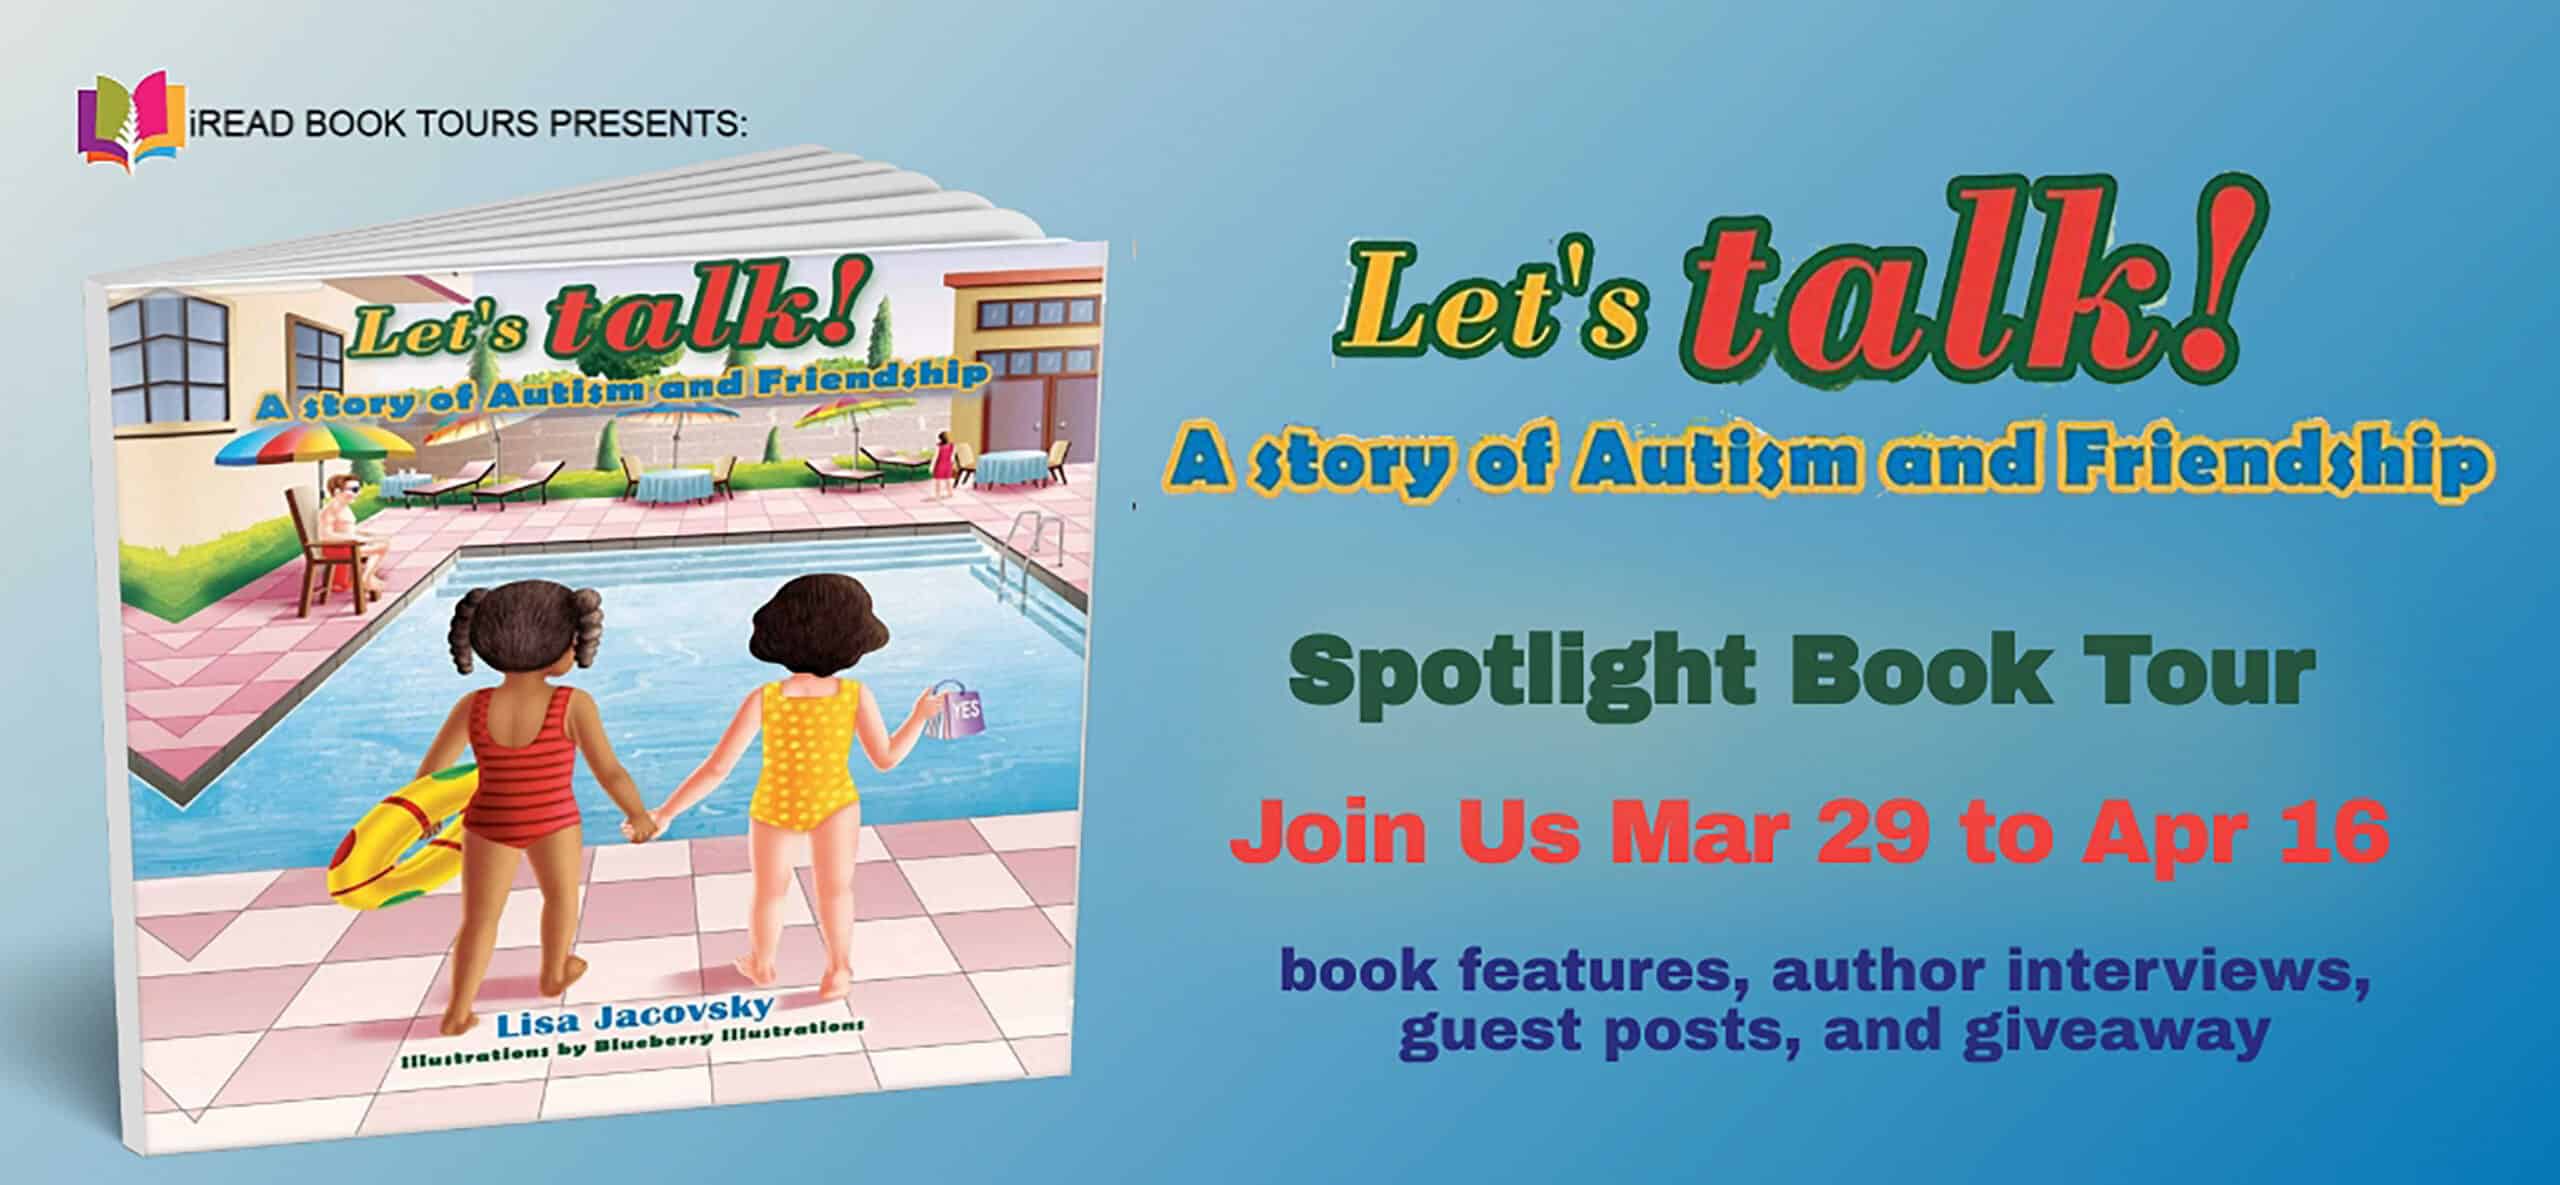 Let's Talk! A Story of Autism and Friendship by Lisa Jacovsky | Book Tour